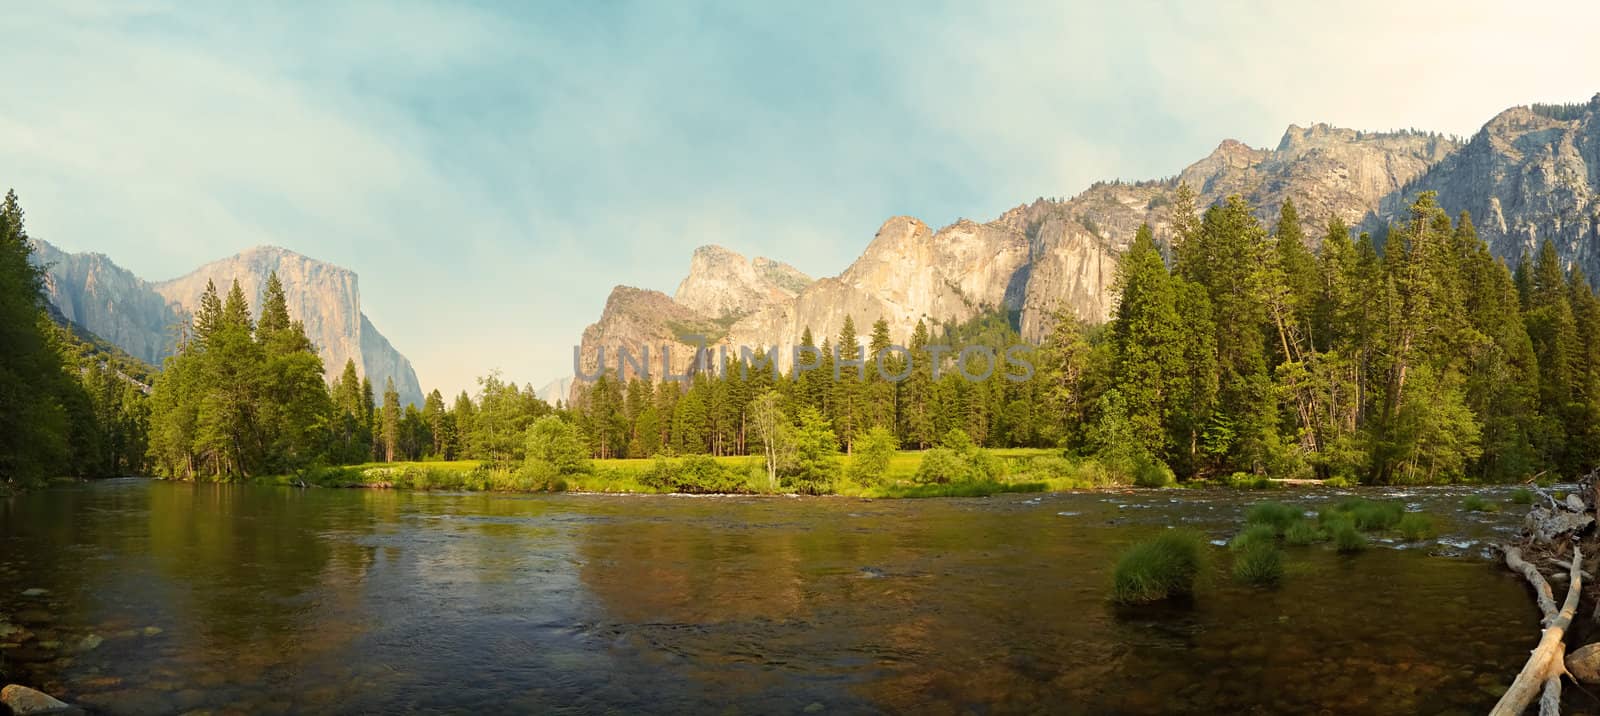 Yosemite Valley panorama by LoonChild